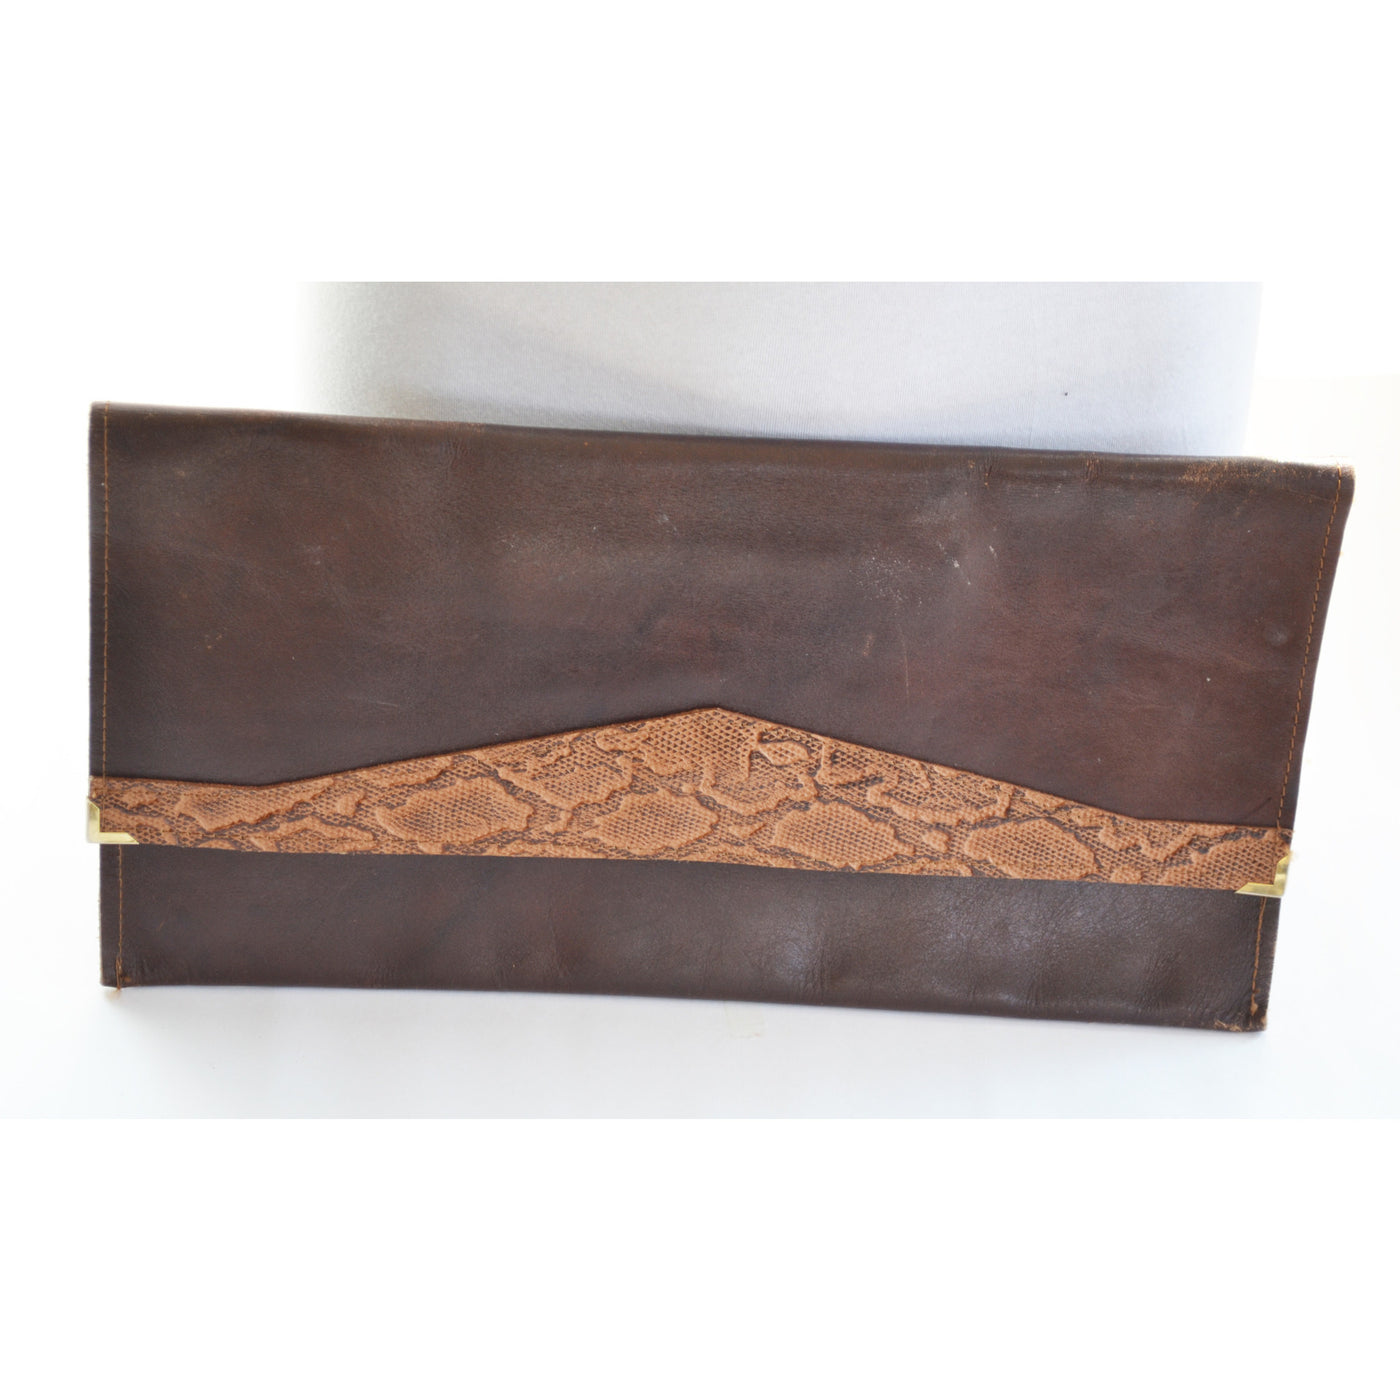 Vintage Oversized Brown Leather & Reptile Clutch Purse